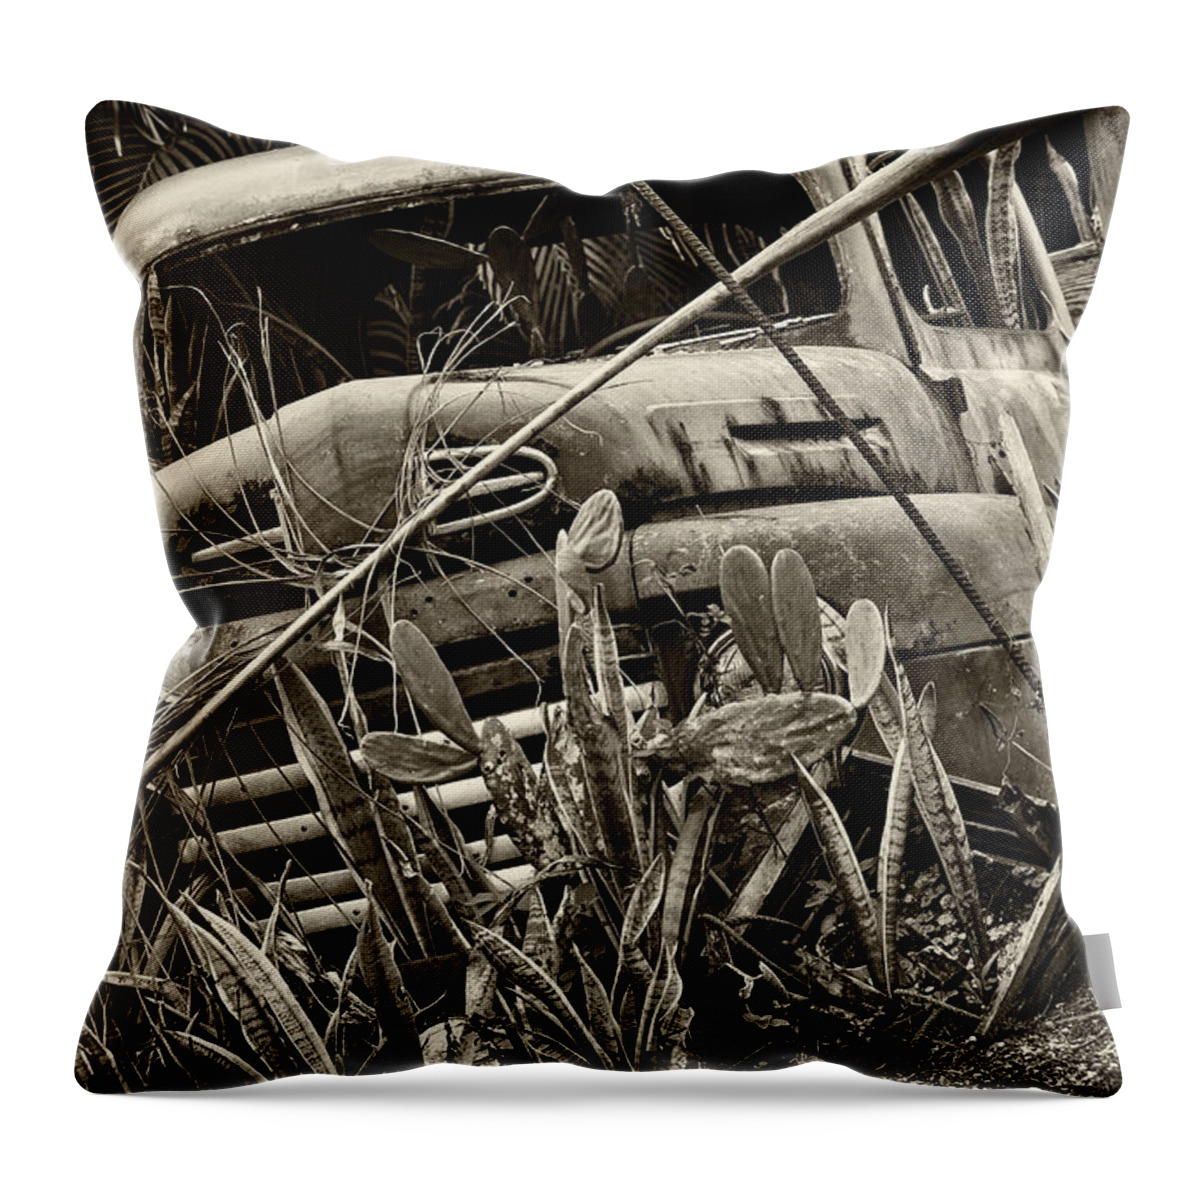 1940s Throw Pillow featuring the photograph Garden Pick Up Truck by Raul Rodriguez